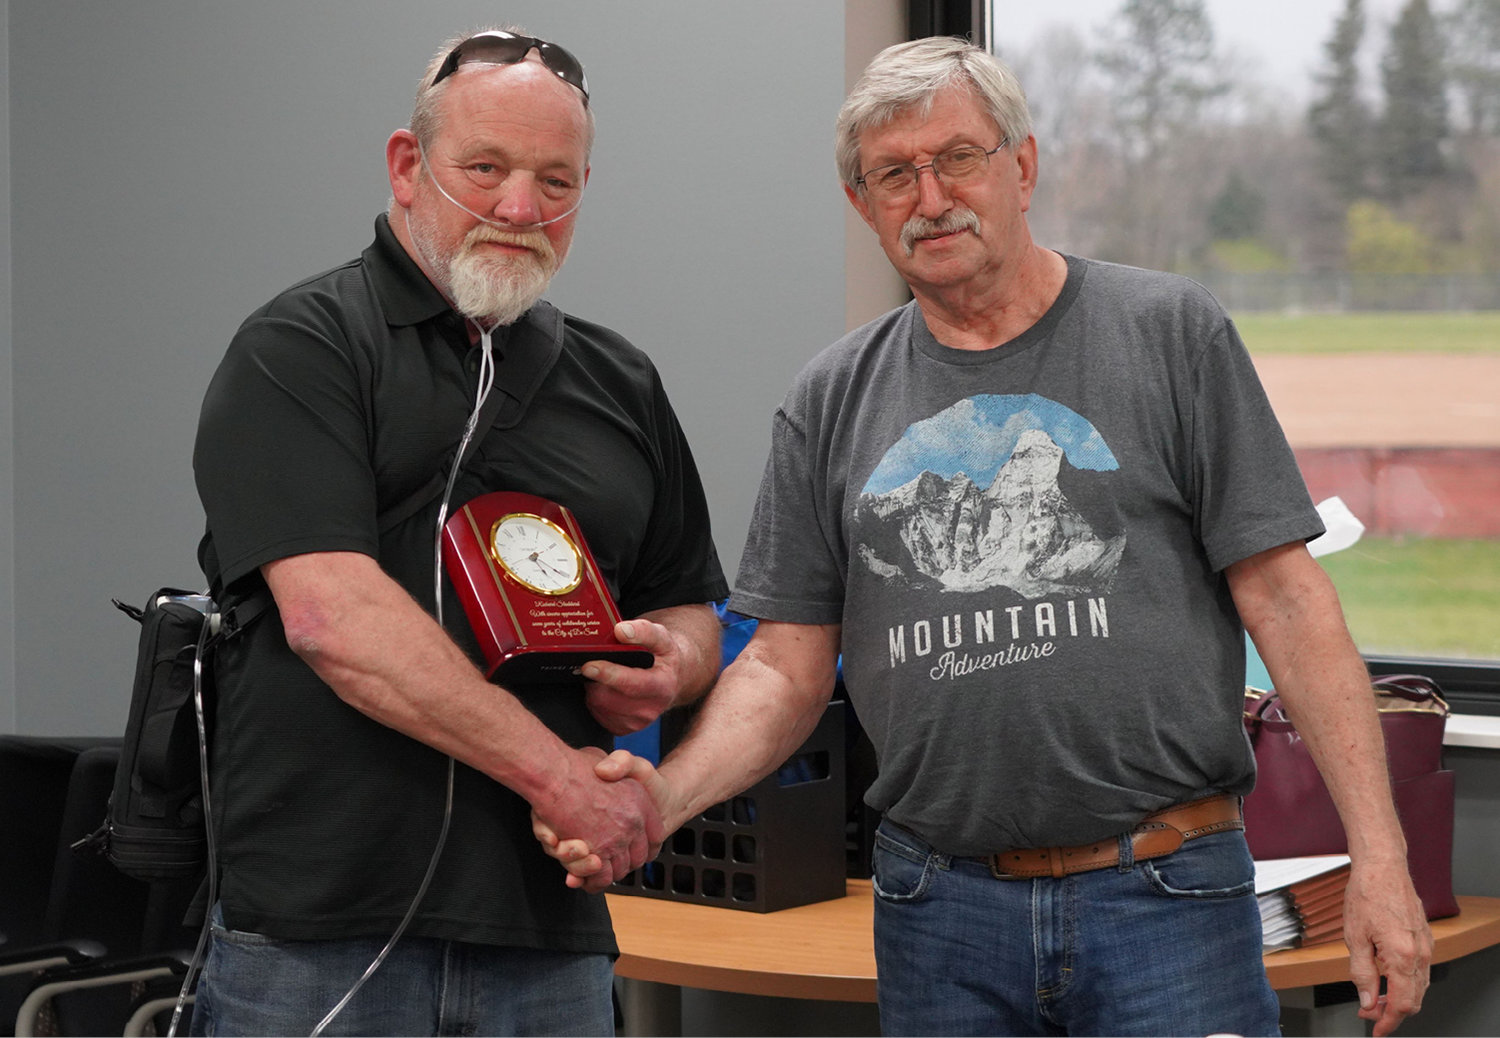 Richard Stoddard, left, was presented with a clock from De Smet Mayor Gary Wolkow at the council meeting Wednesday. Stoddard had been employed with the City of De Smet for seven years and was the water and wastewater superintendent when he retired.